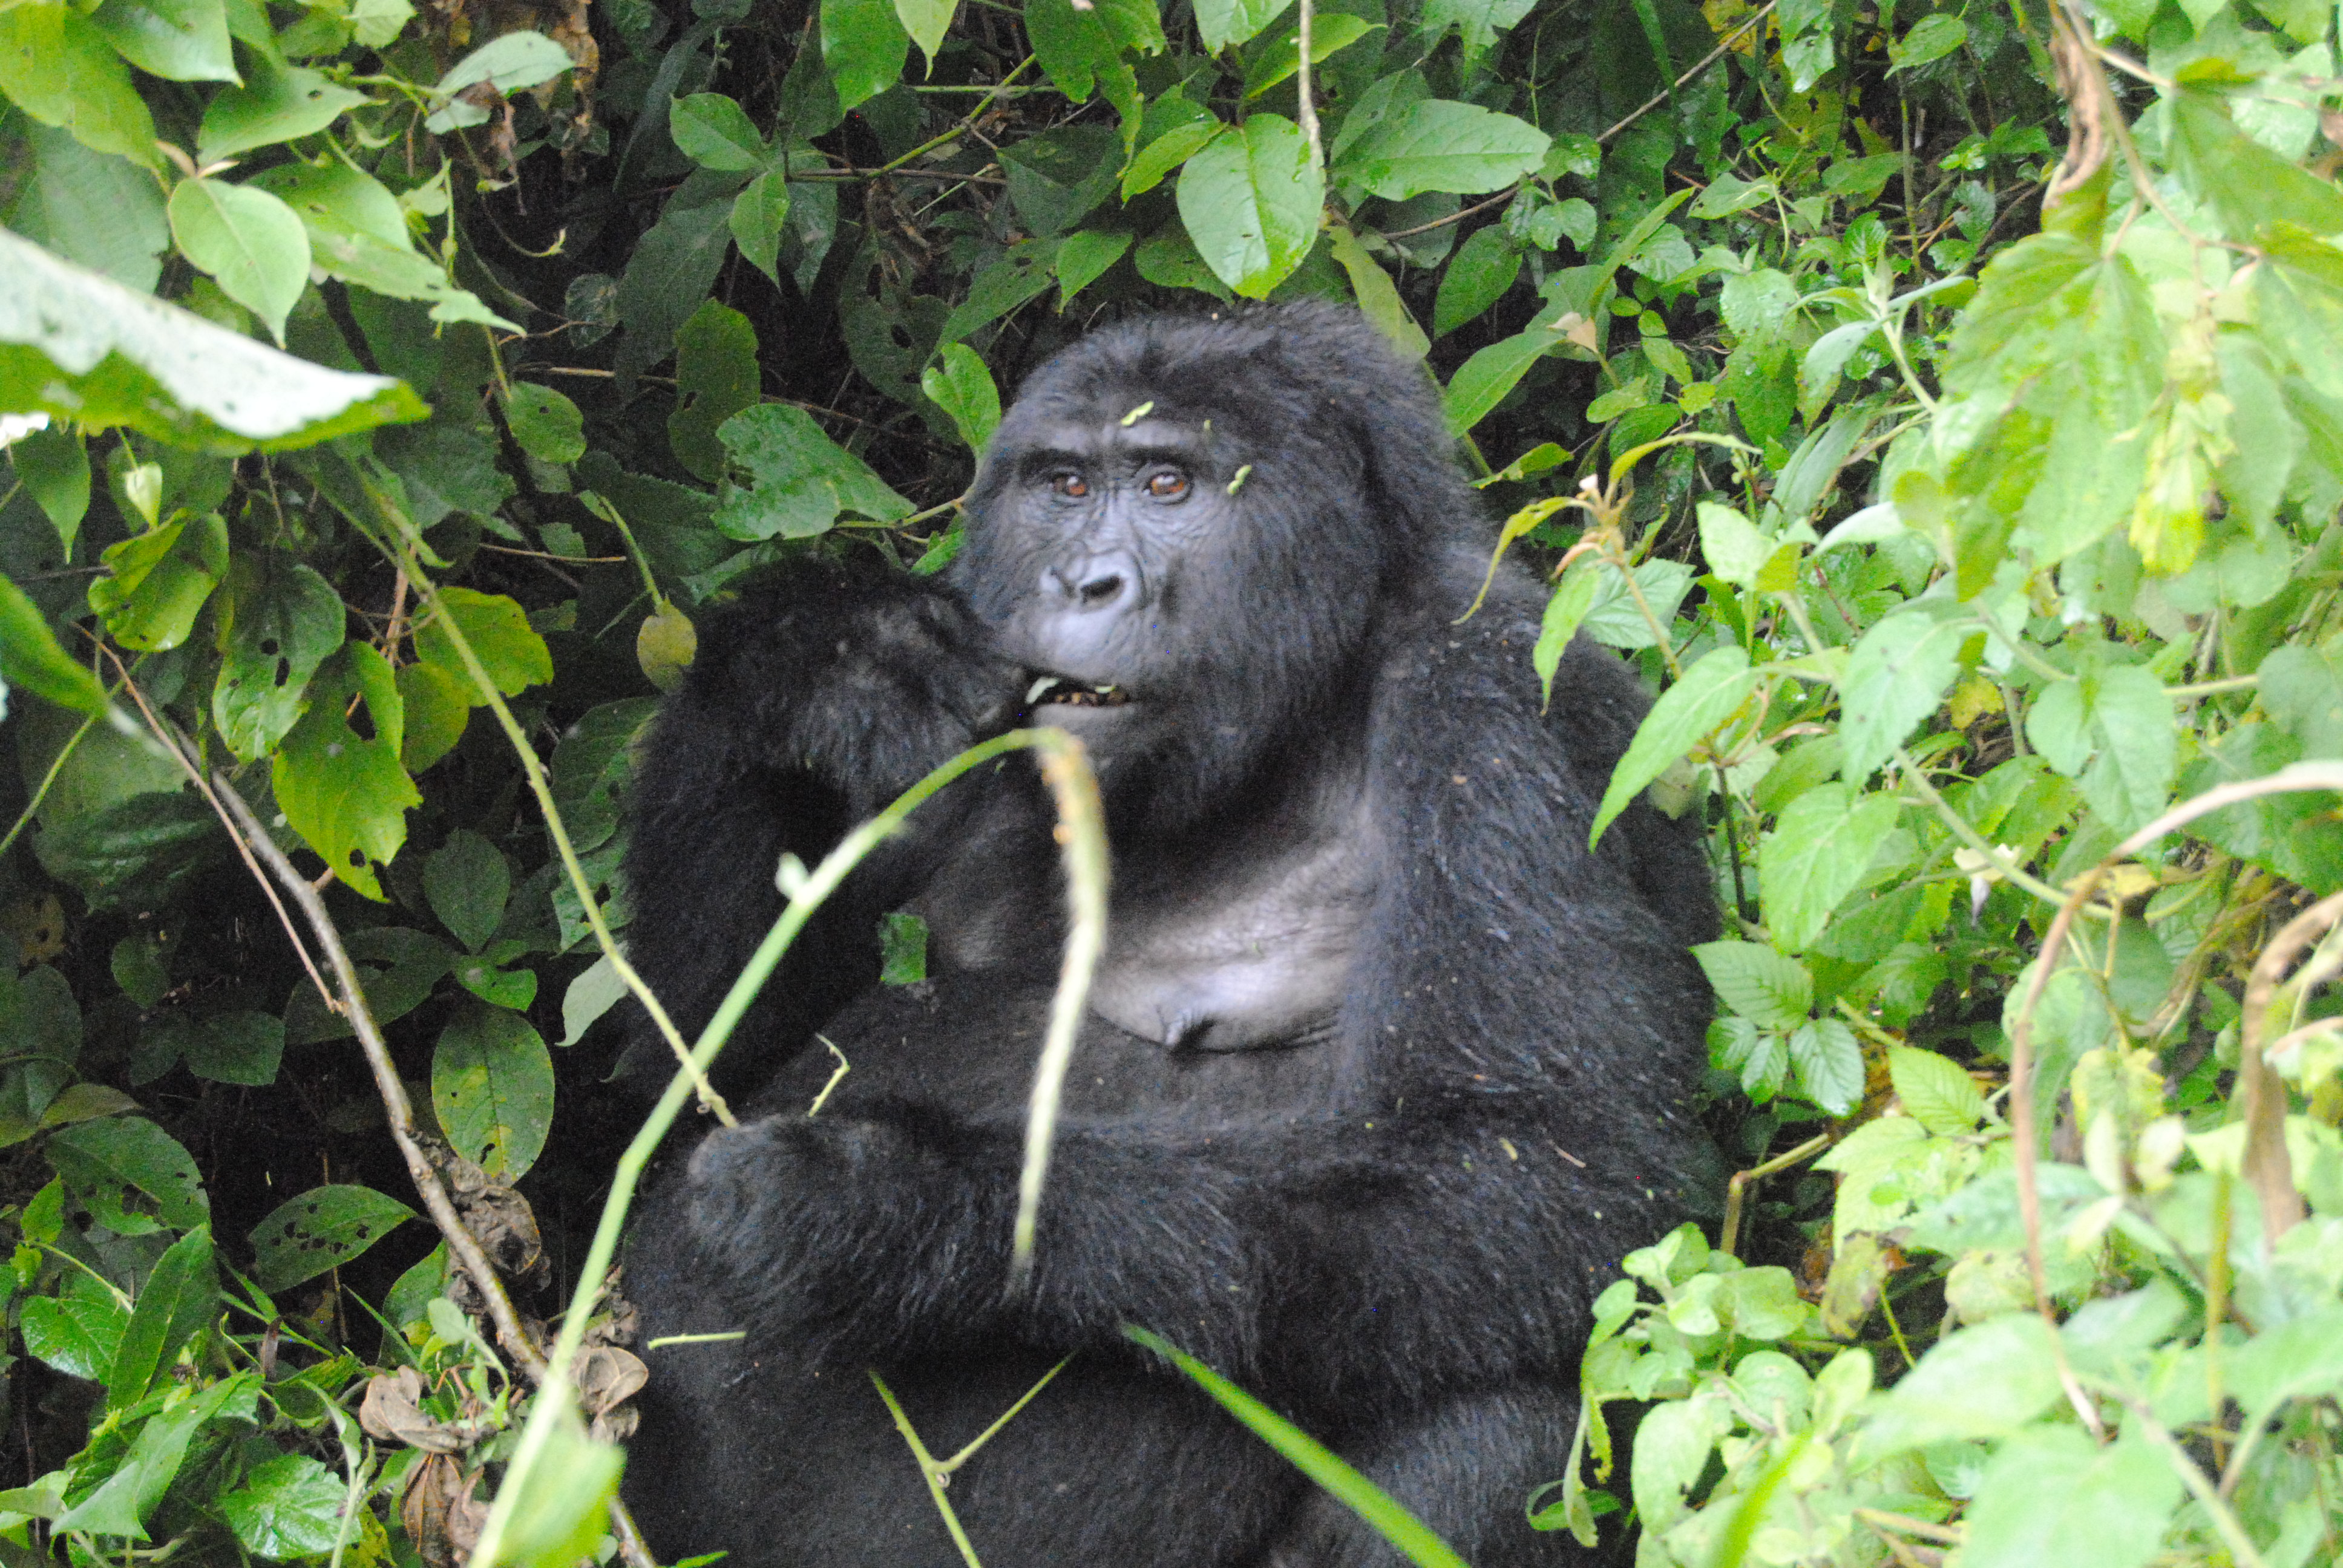 From conflict to coexistence, part 3: Human-gorilla conflict management efforts pay off